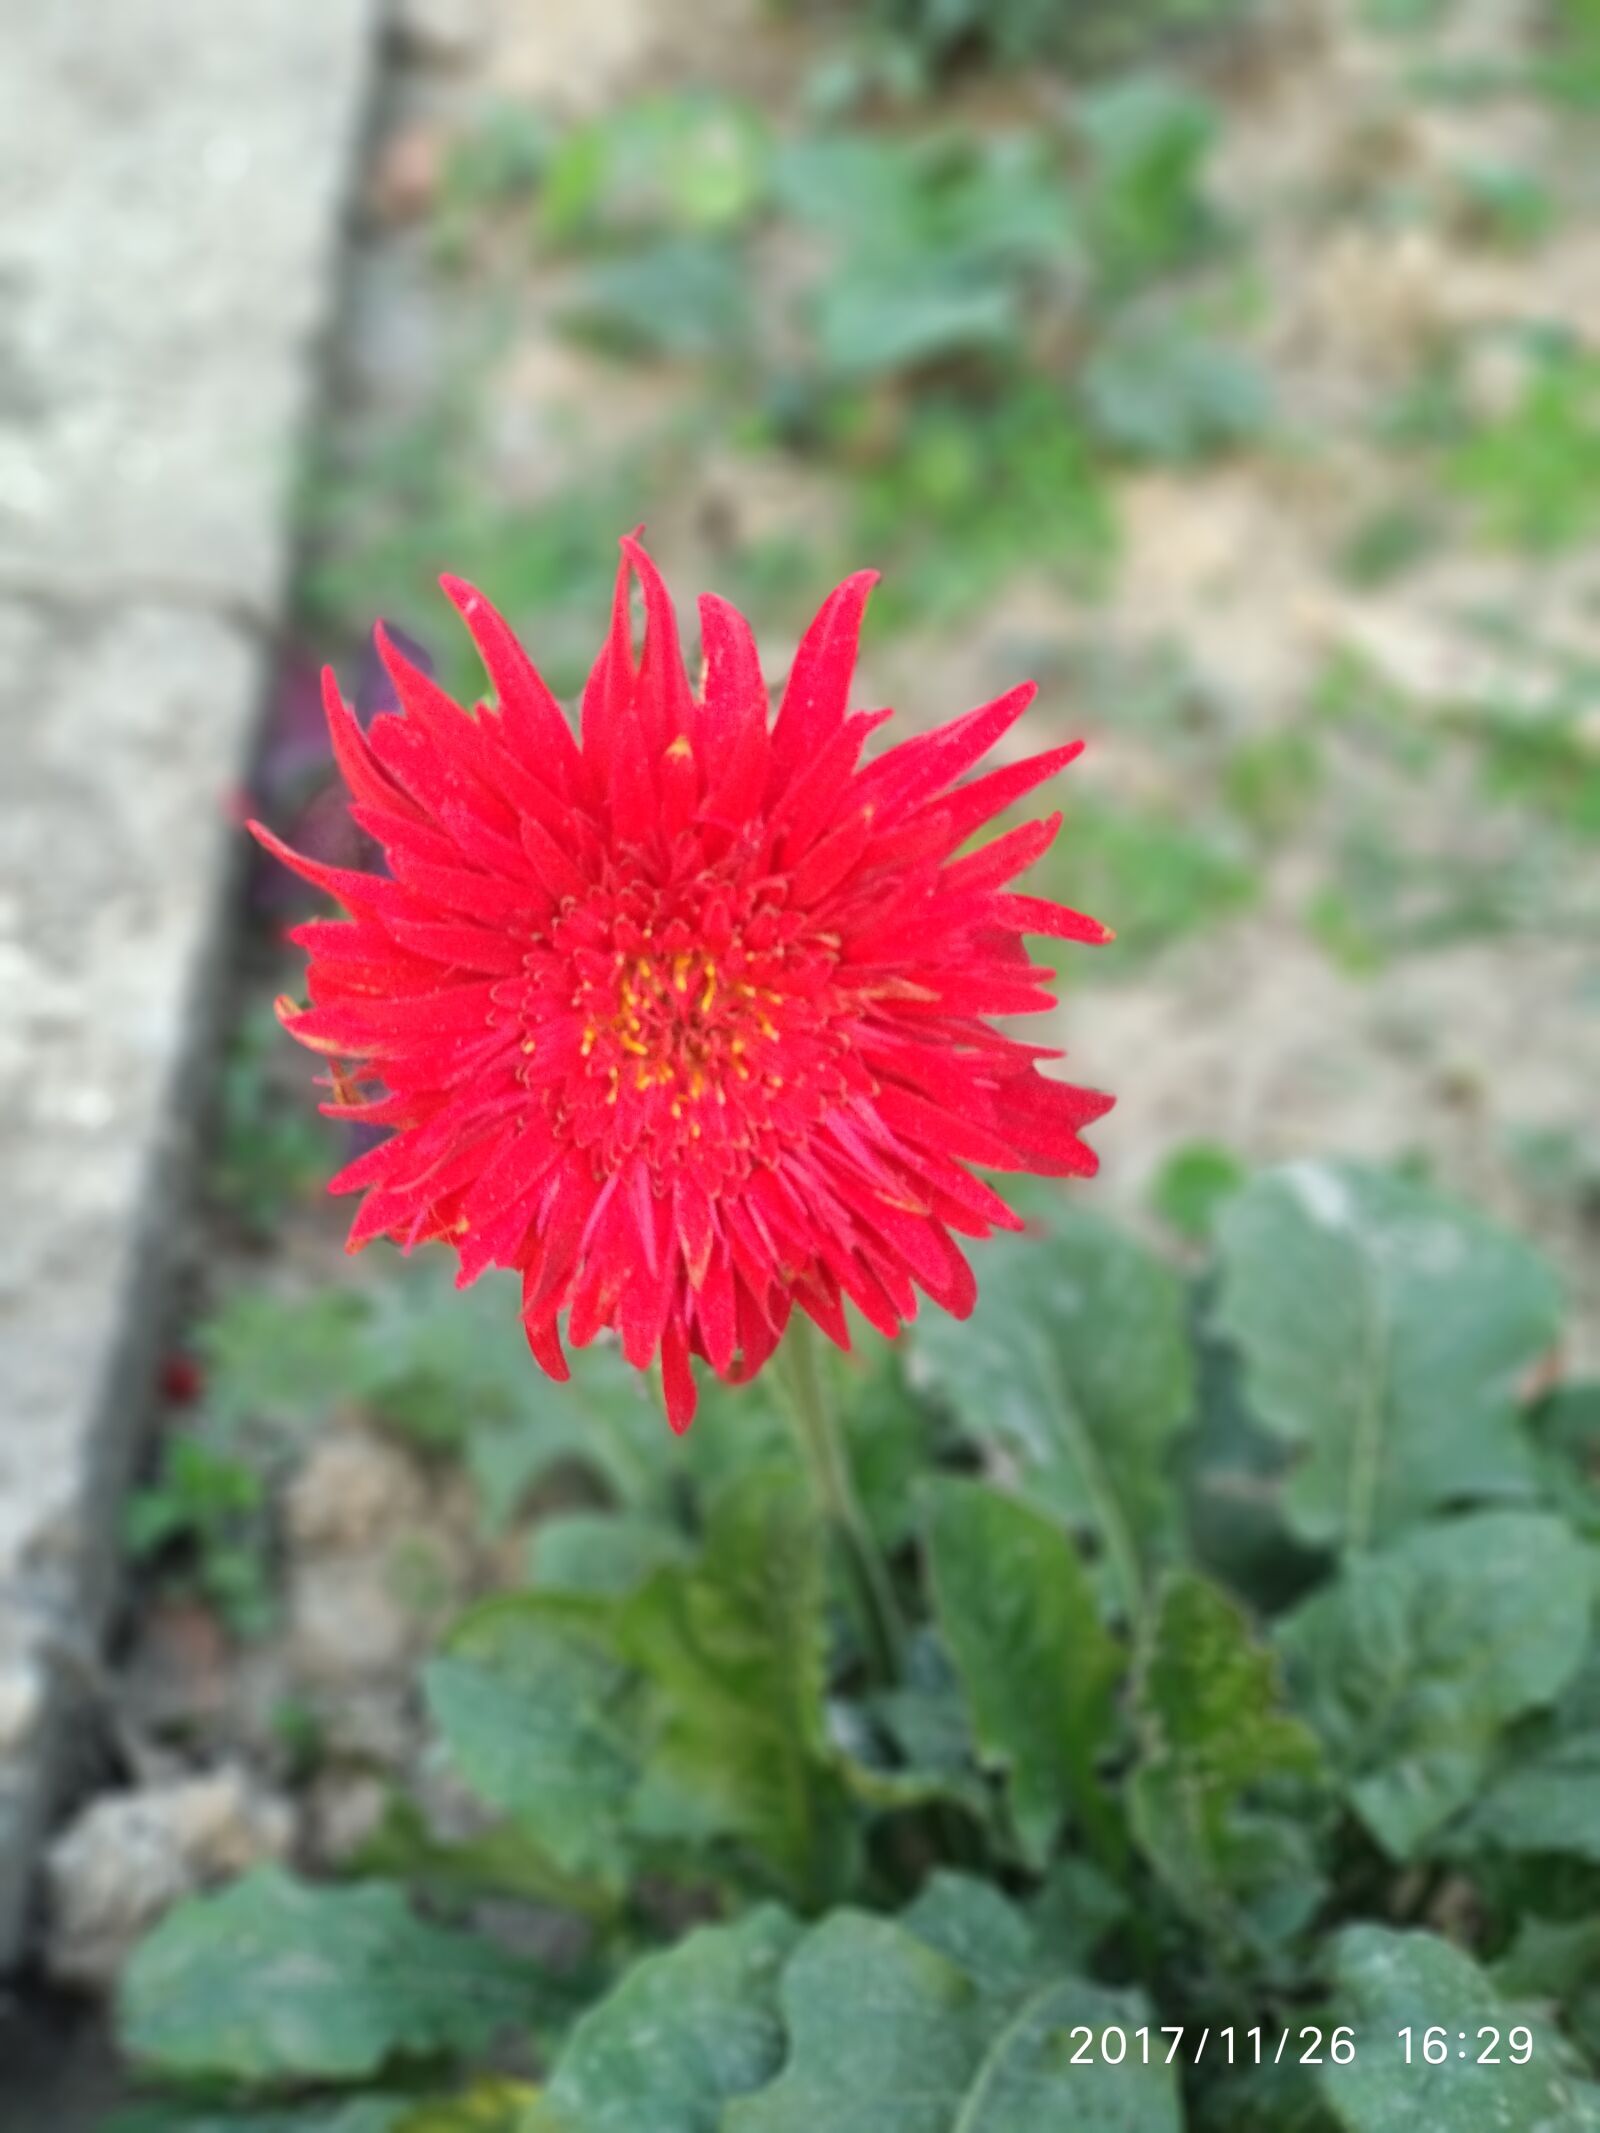 Xiaomi Mi A1 sample photo. Flower, nature, spring photography